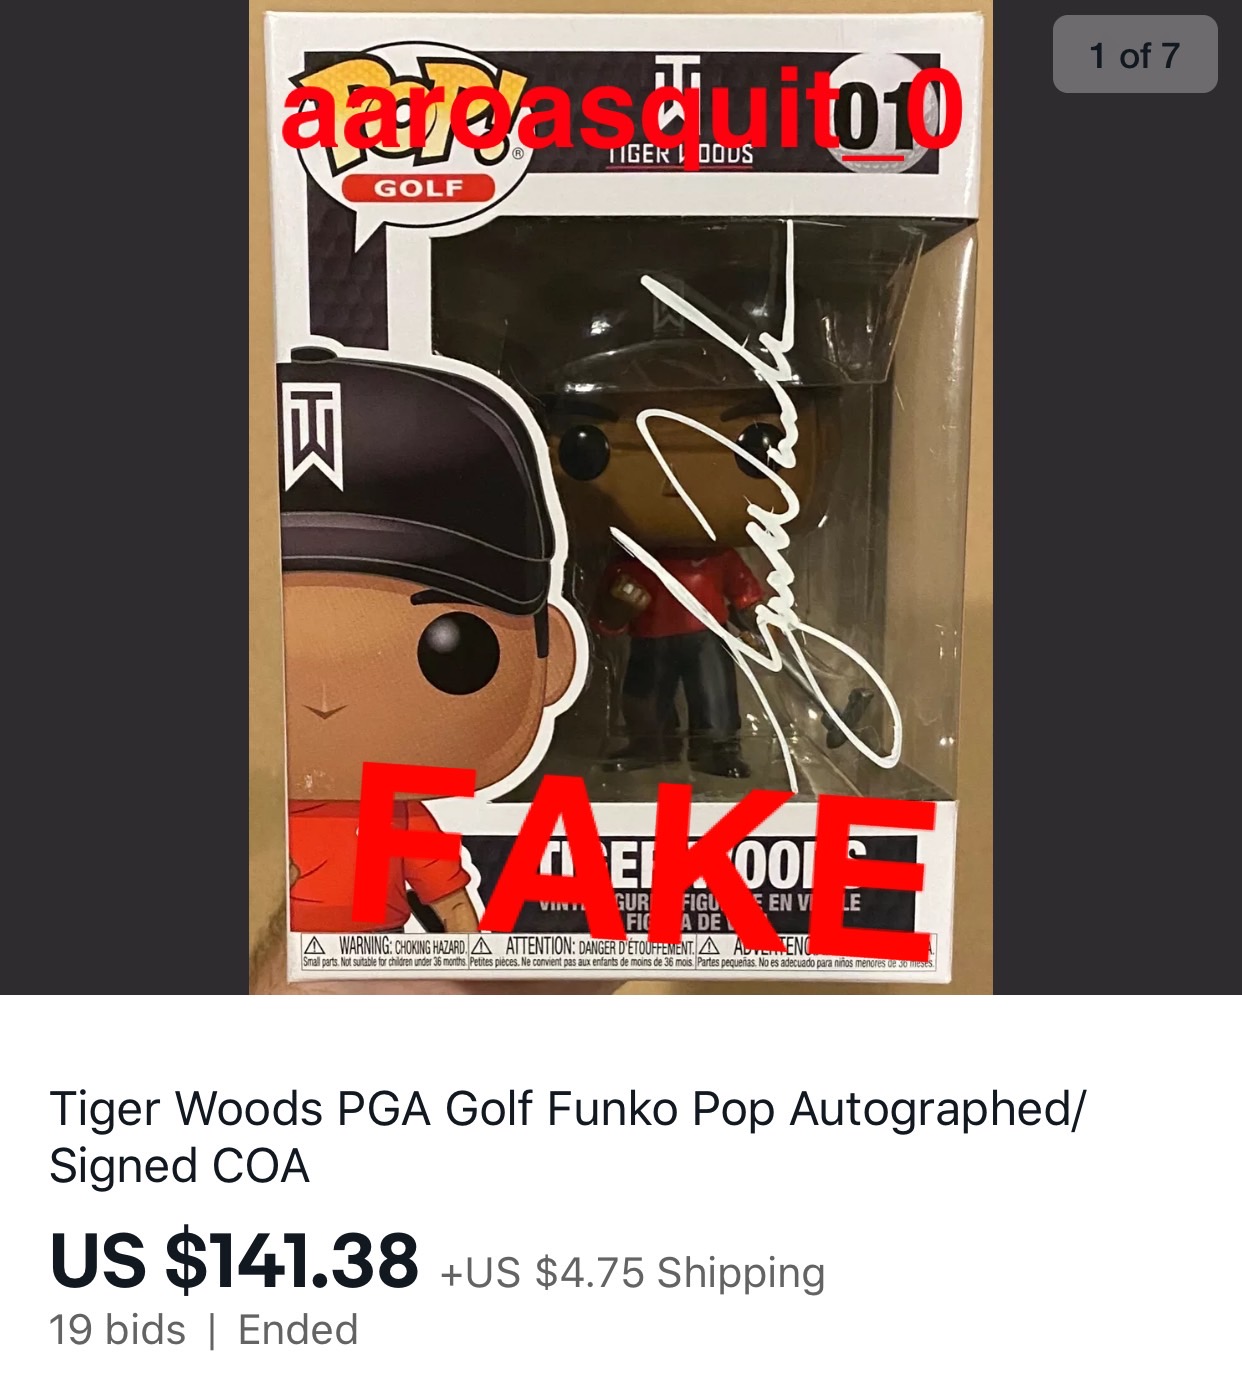 Tiger Woods forgery